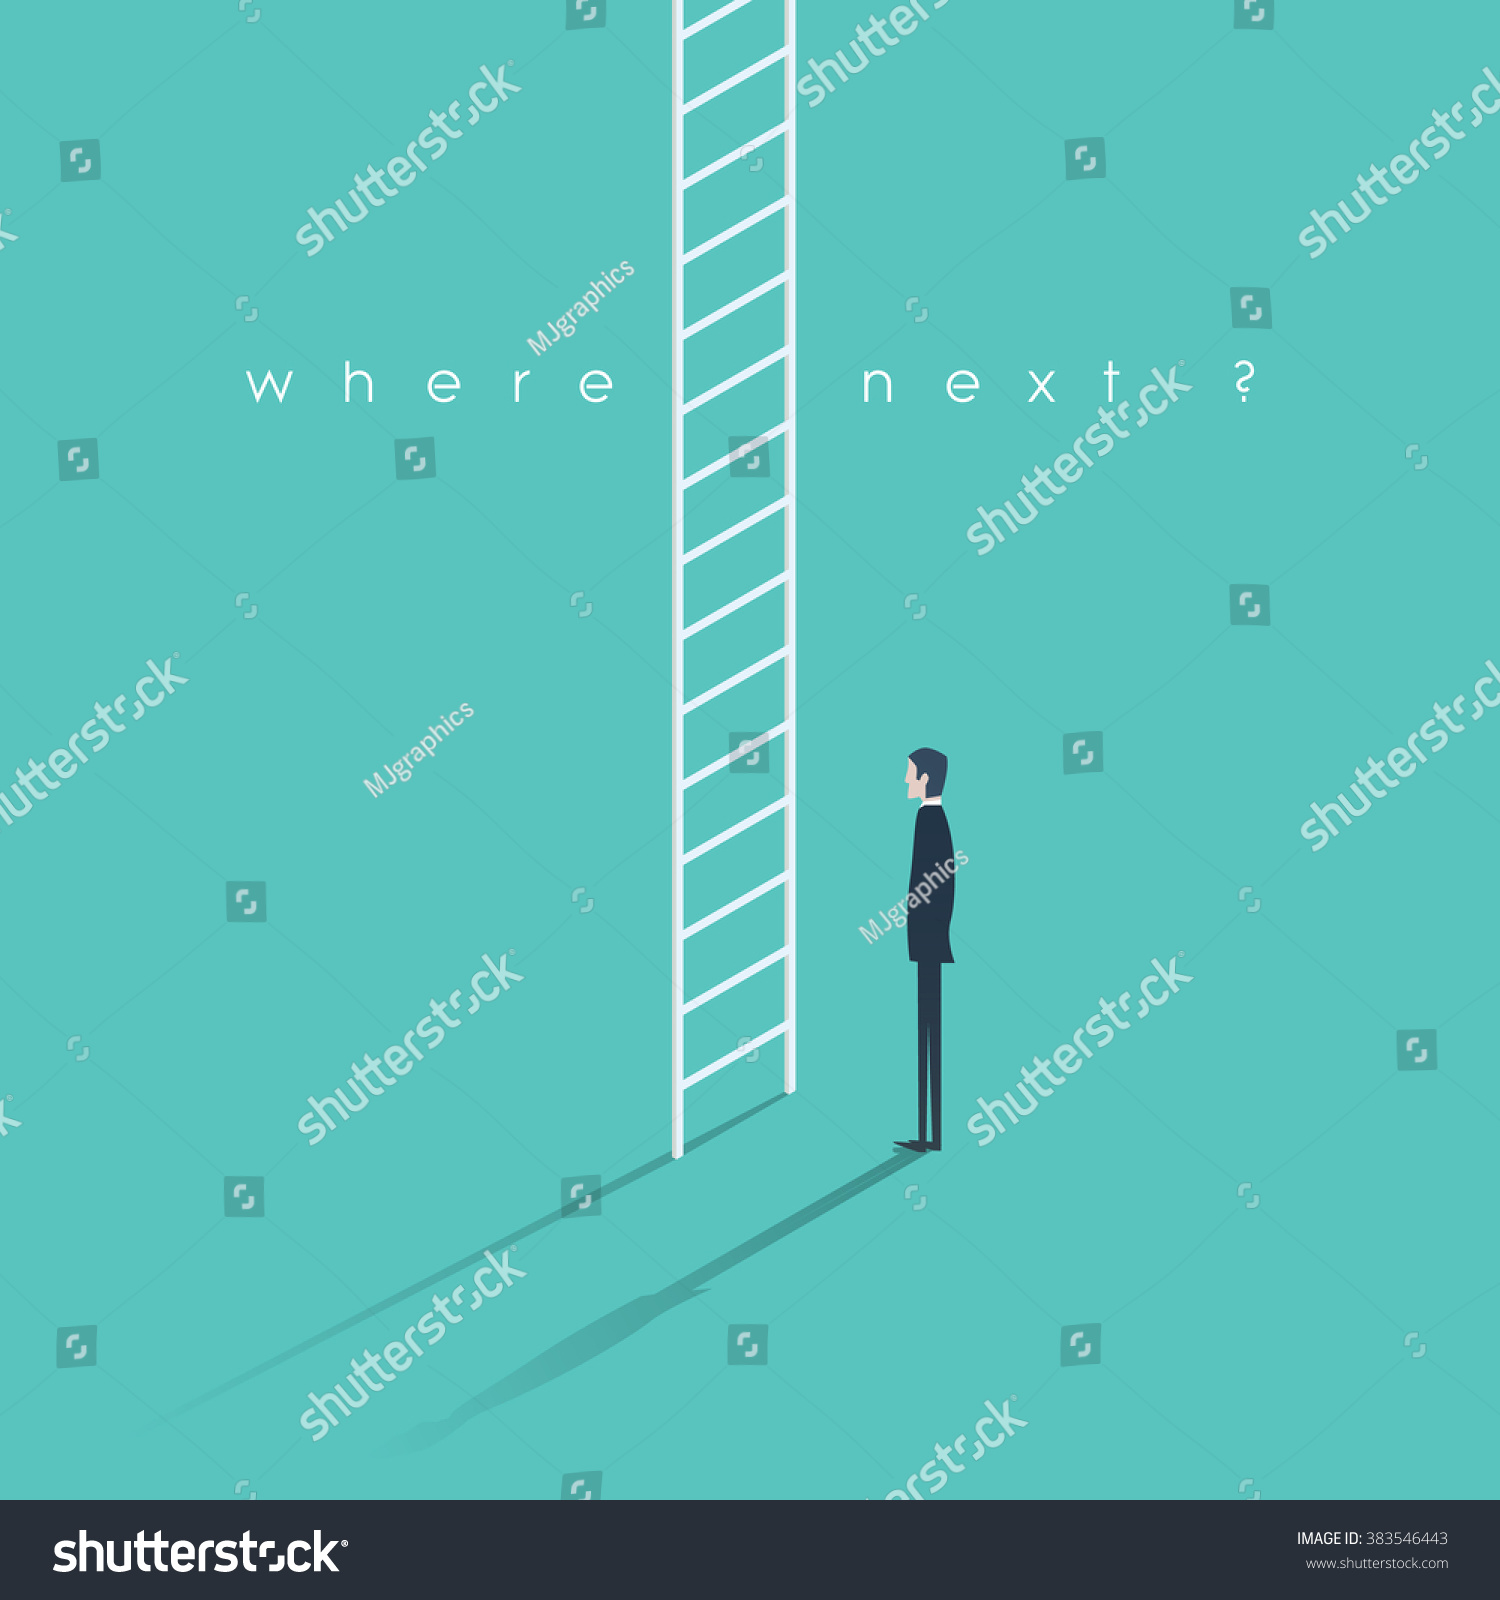 Corporate Ladder Concept Illustration Businessman Making Stock Vector Royalty Free 383546443